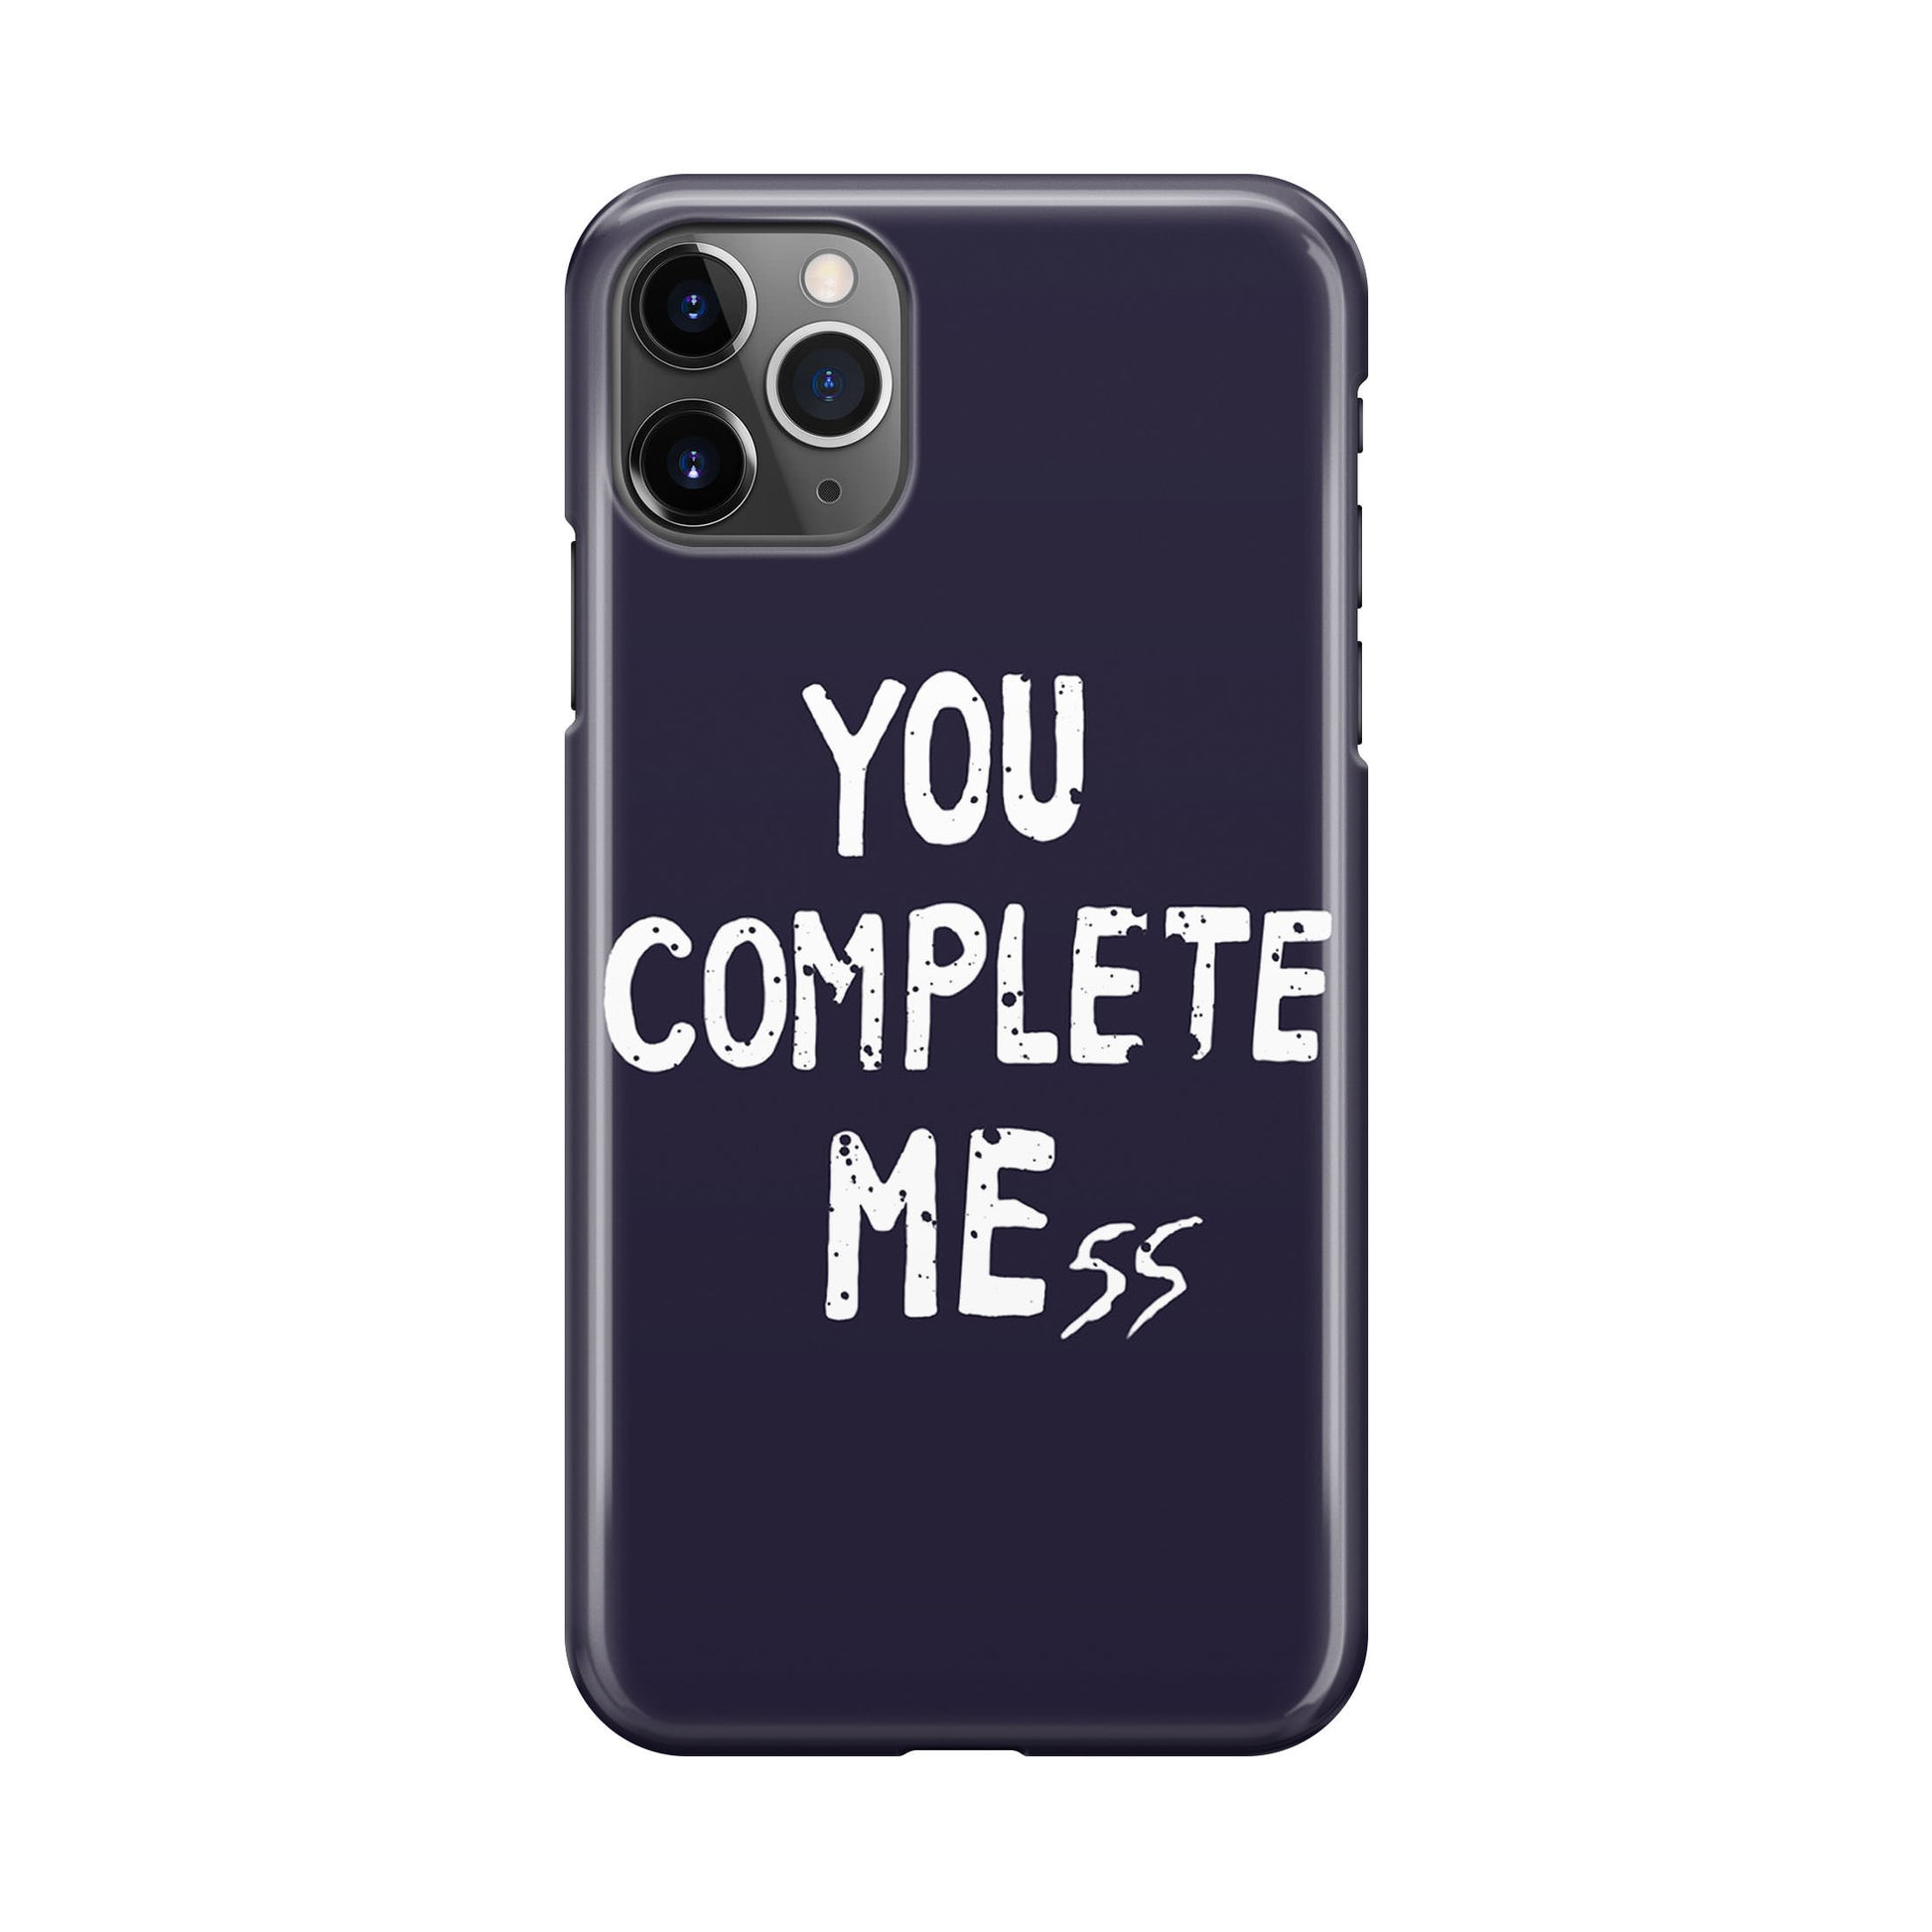 You Complete Me iPhone 11 Pro Max Case